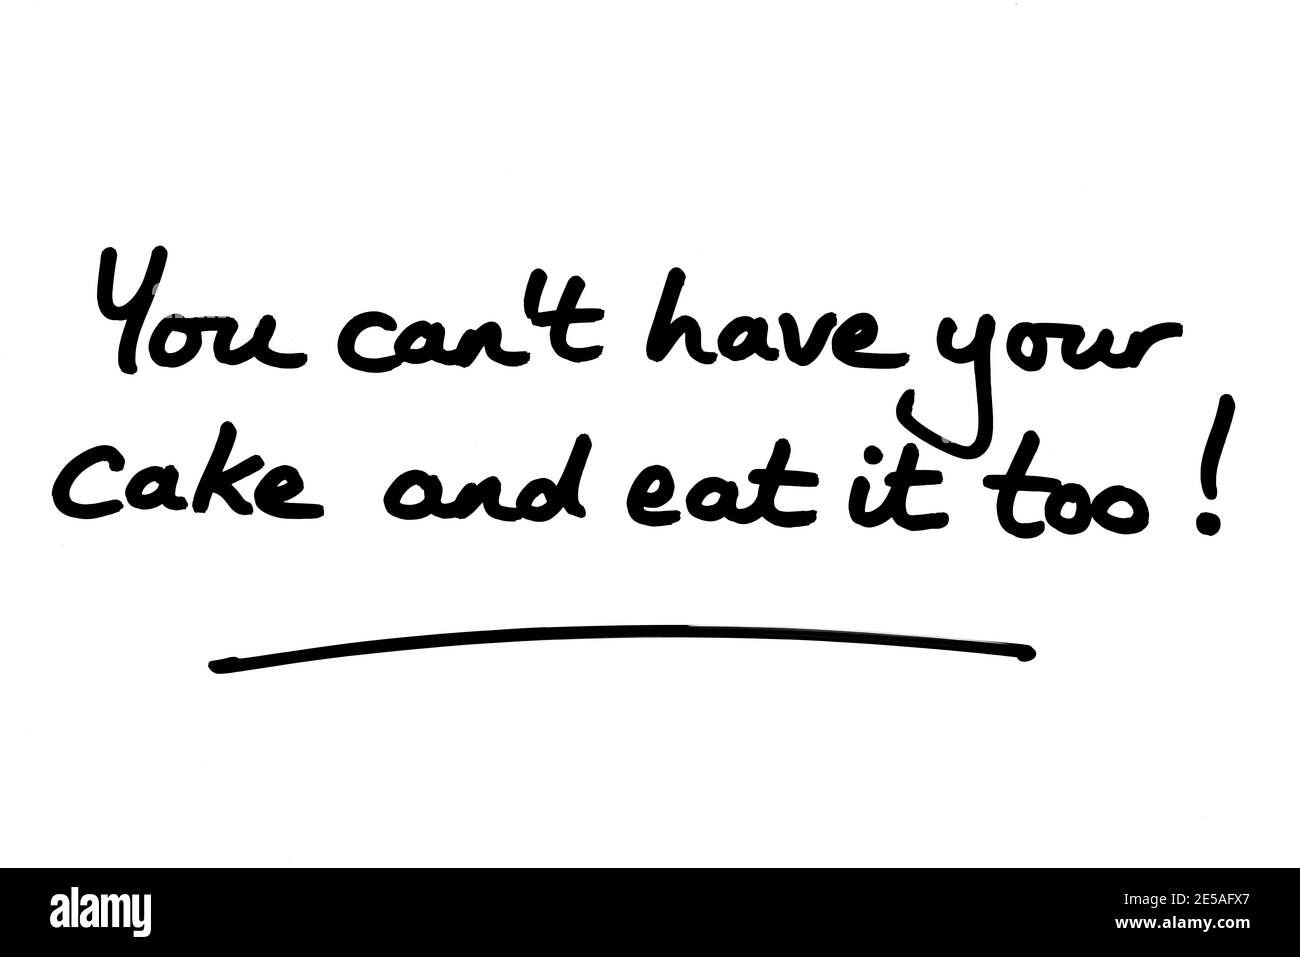 You cant have your cake and eat it too! handwritten on a white background. Stock Photo